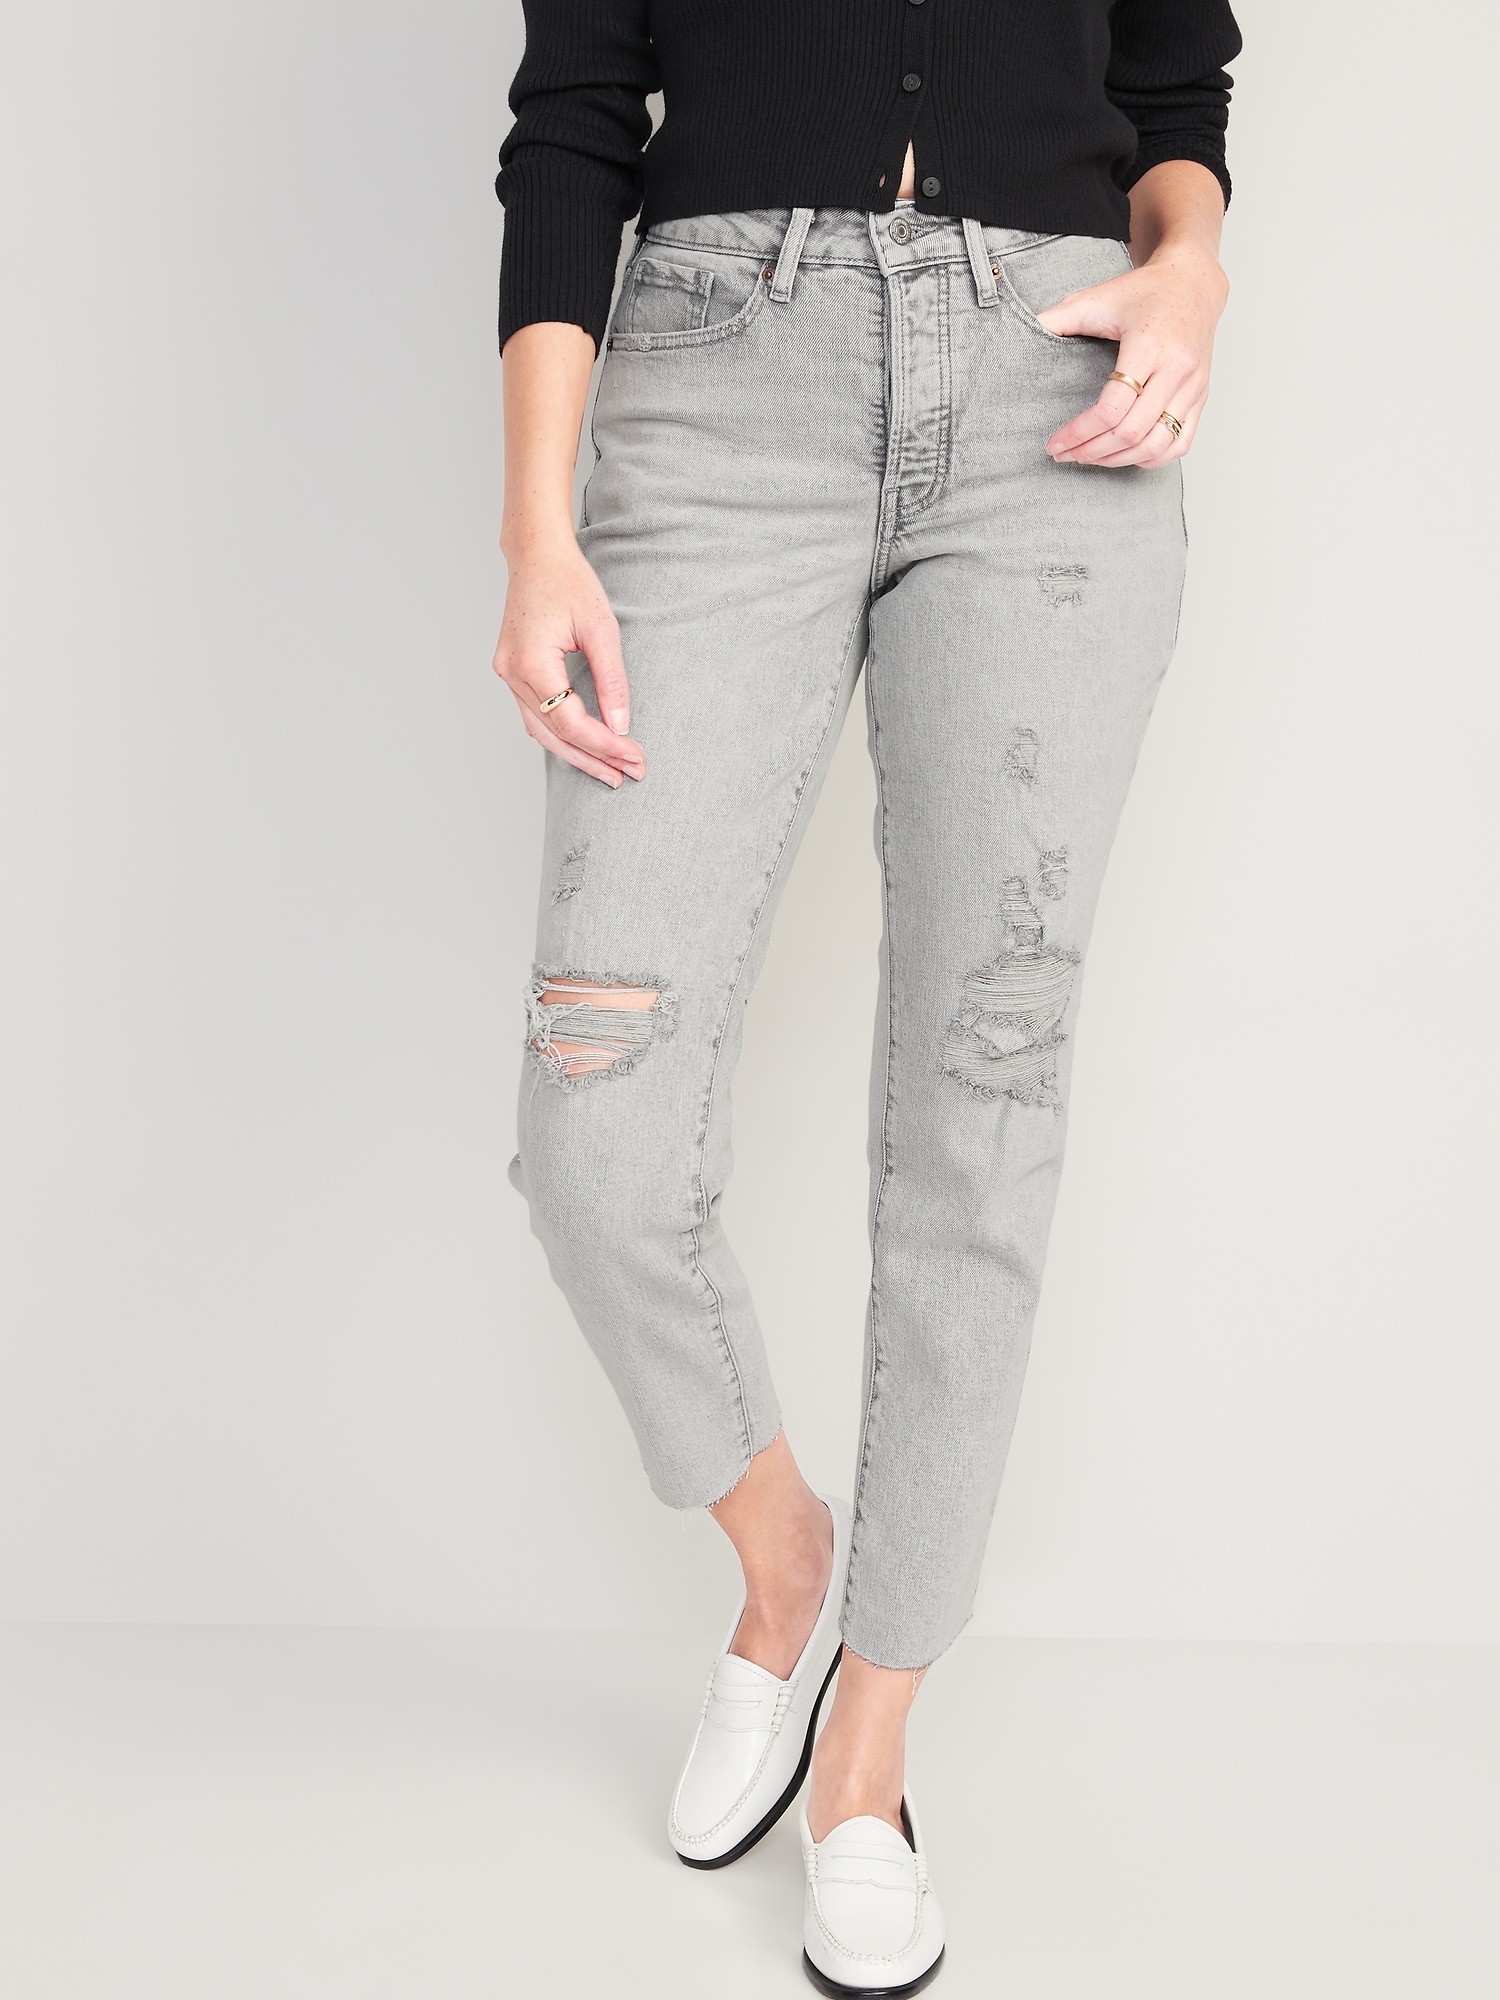 Grey Jeans - Buy Grey Jeans for Men, Women and Kids Online